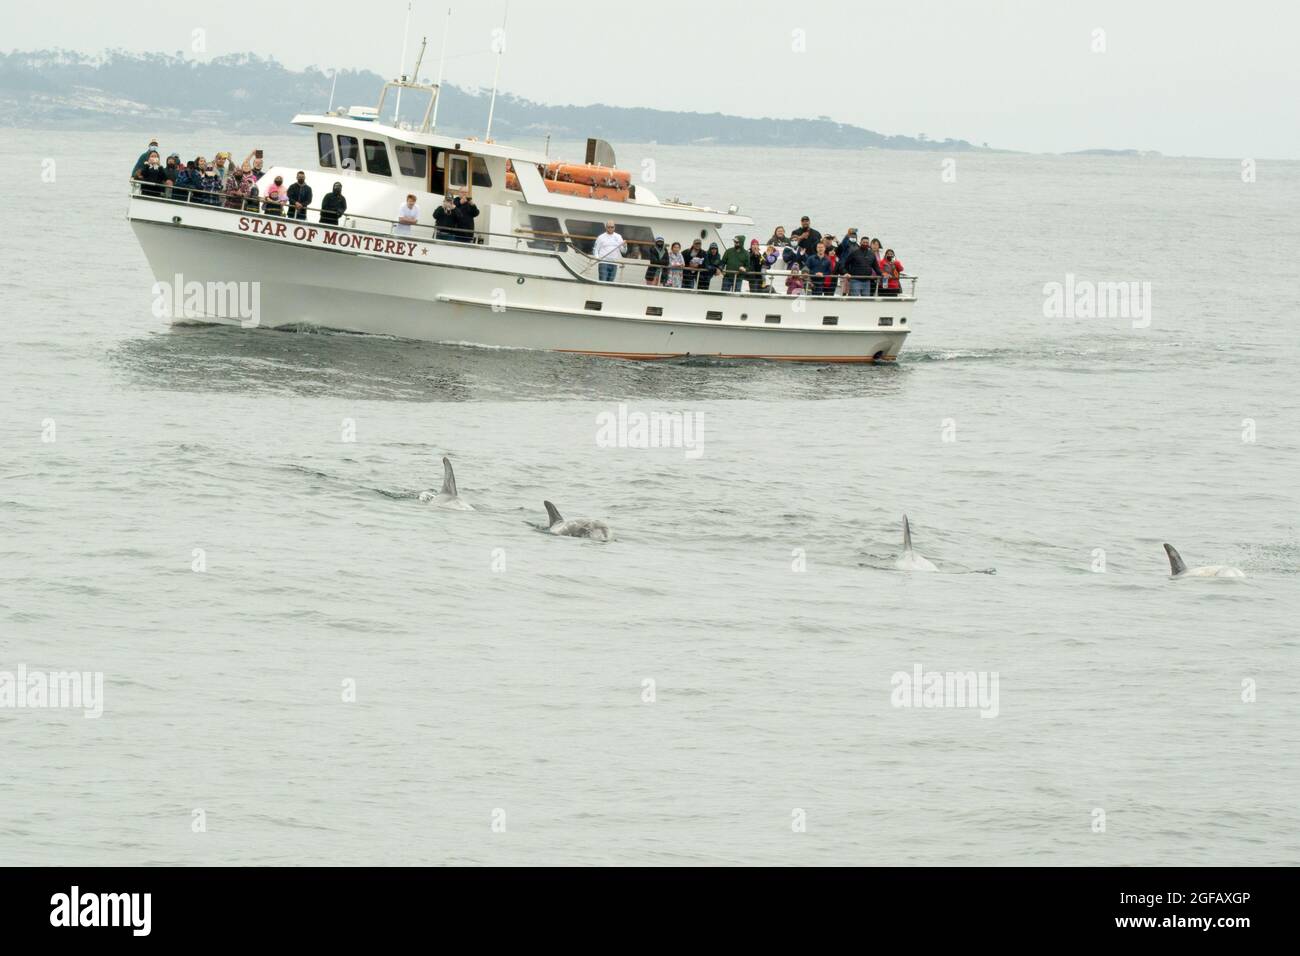 4 Risso's Dolphins swimming in front of white fibreglass whale watching boat 'Star of Monterey'. Passengers on deck watching & filming wild dolphins Stock Photo